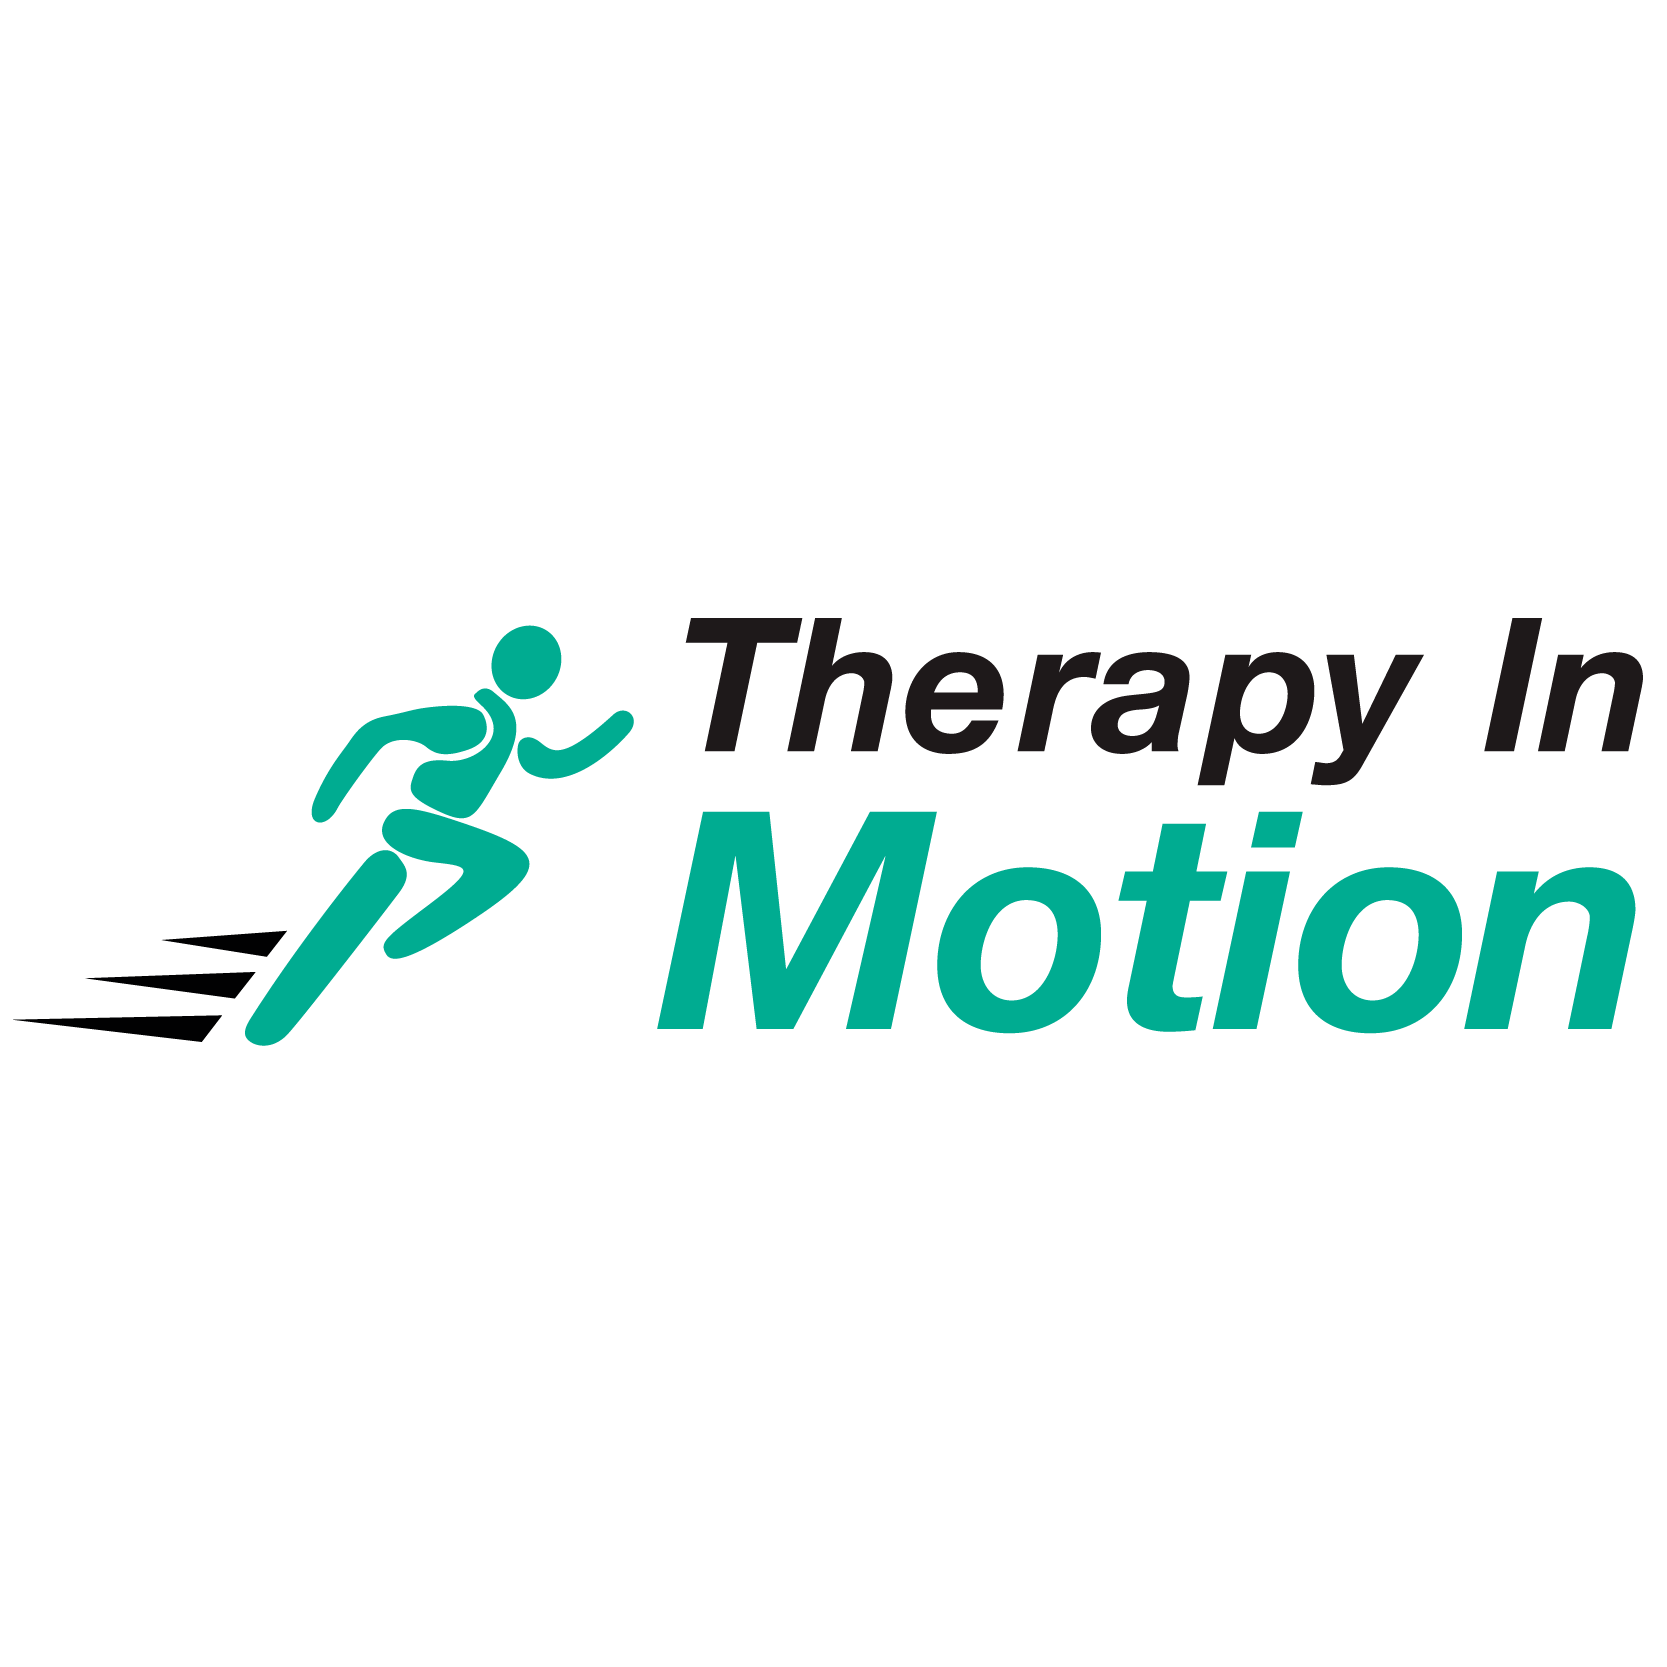 Therapy In Motion Physical Therapy - Edmond, OK 73003 - (405)396-8000 | ShowMeLocal.com